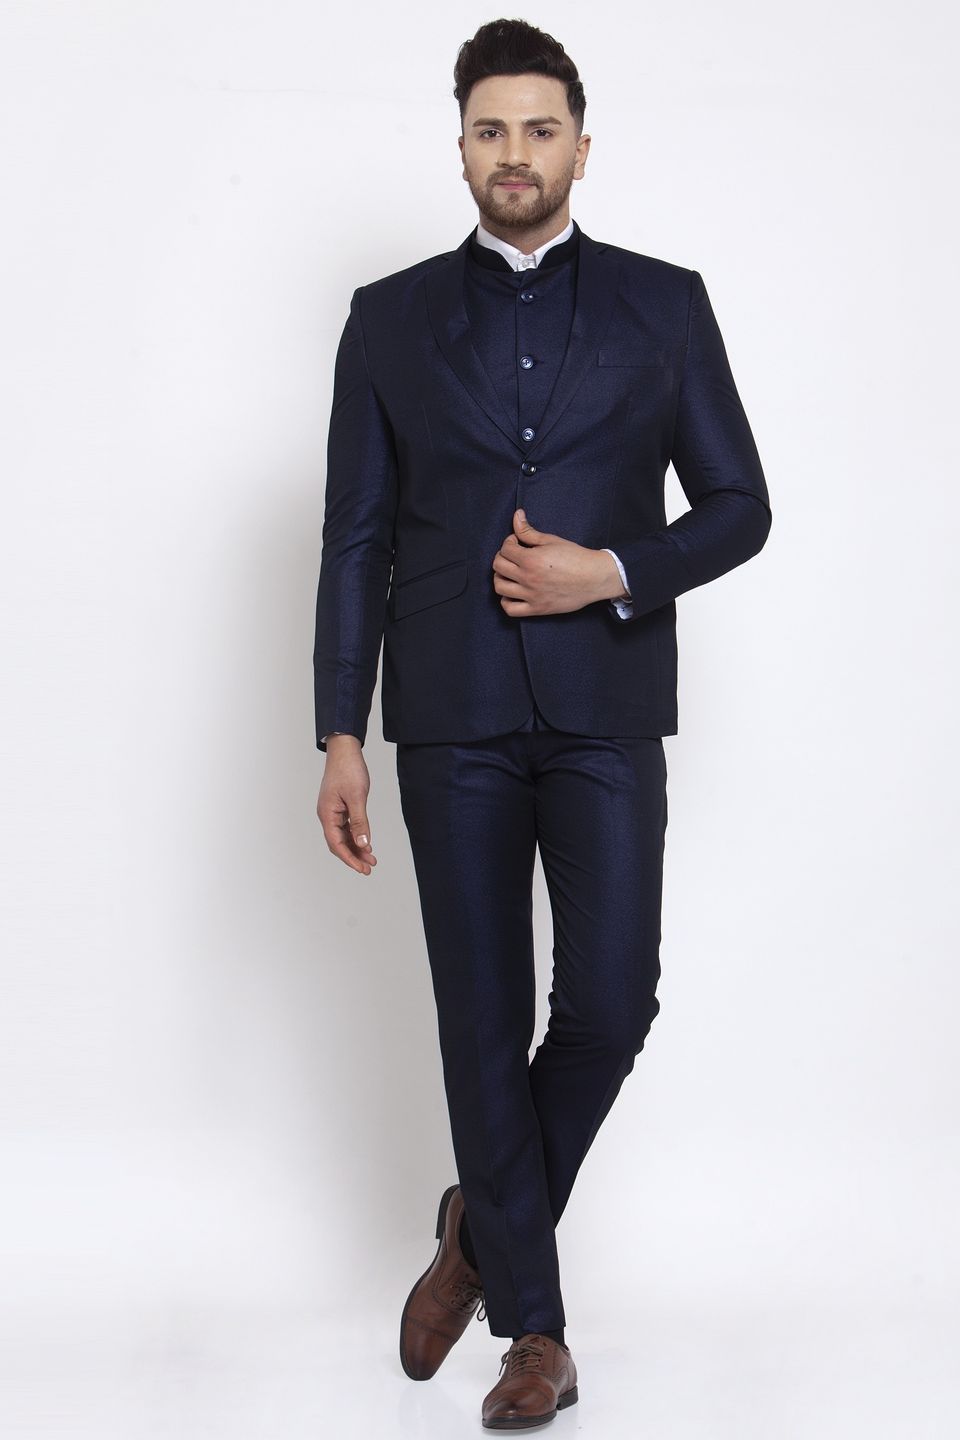 Wintage Men's Poly Blend and Evening 3 Pc Suit : Navy Blue